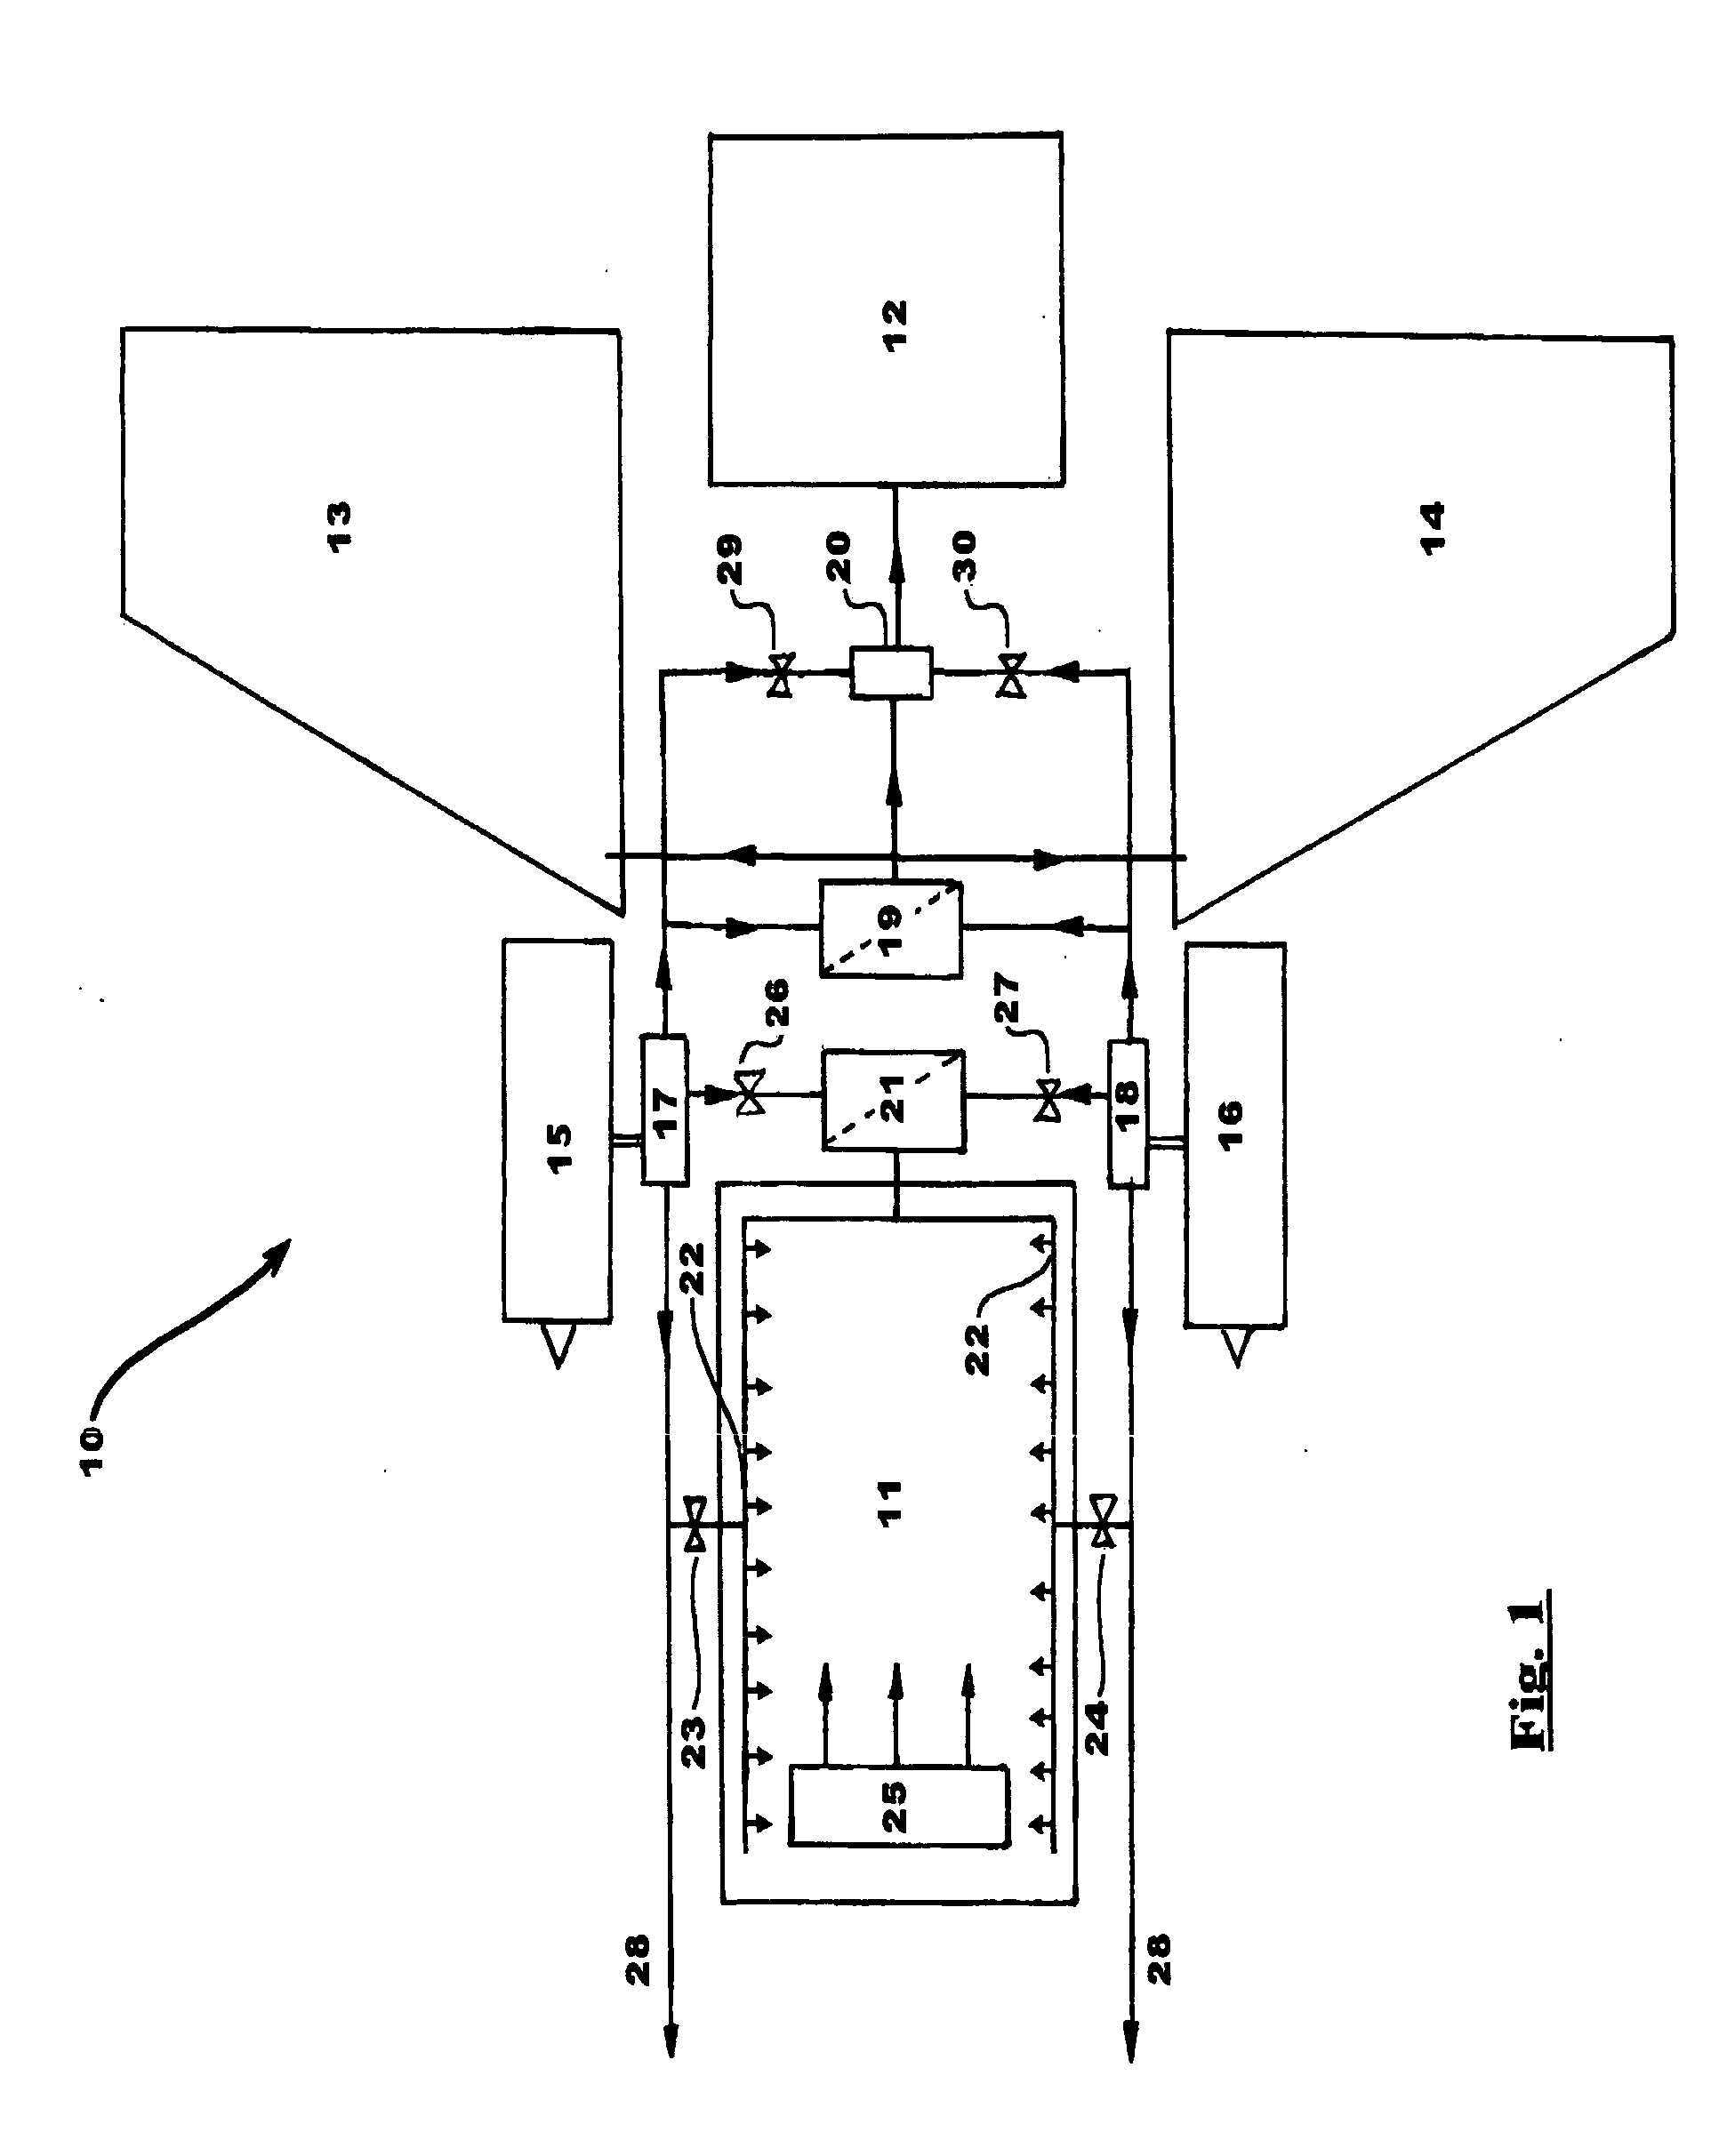 Hypoxic aircraft fire prevention and suppression system with automatic emergency oxygen delivery system